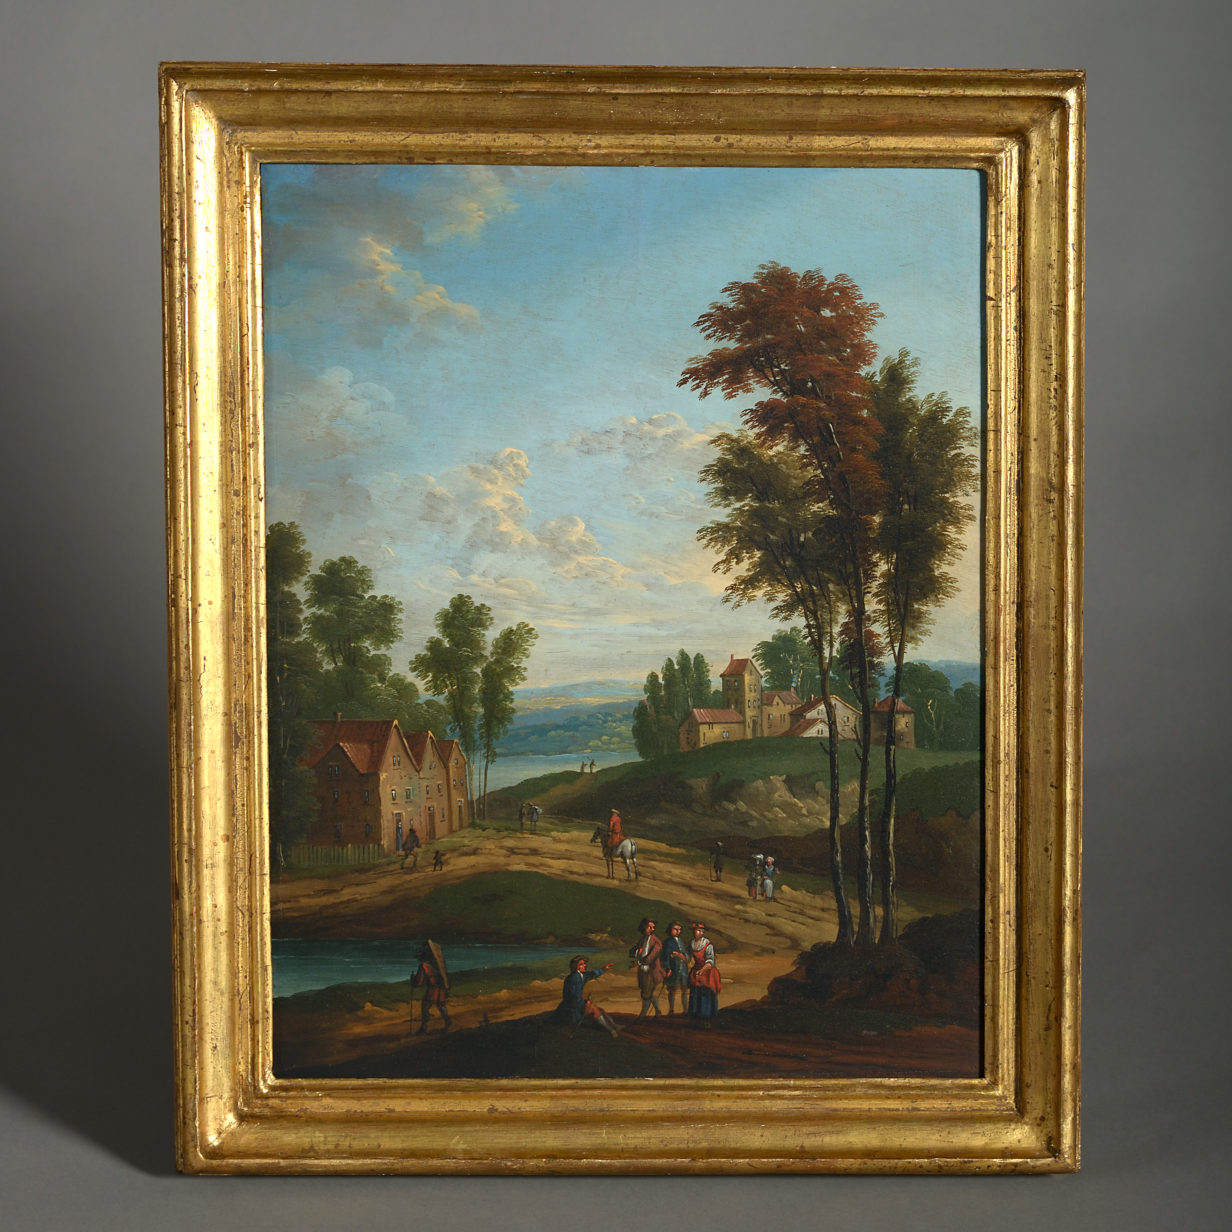 19th century landscapes in the 18th century manner